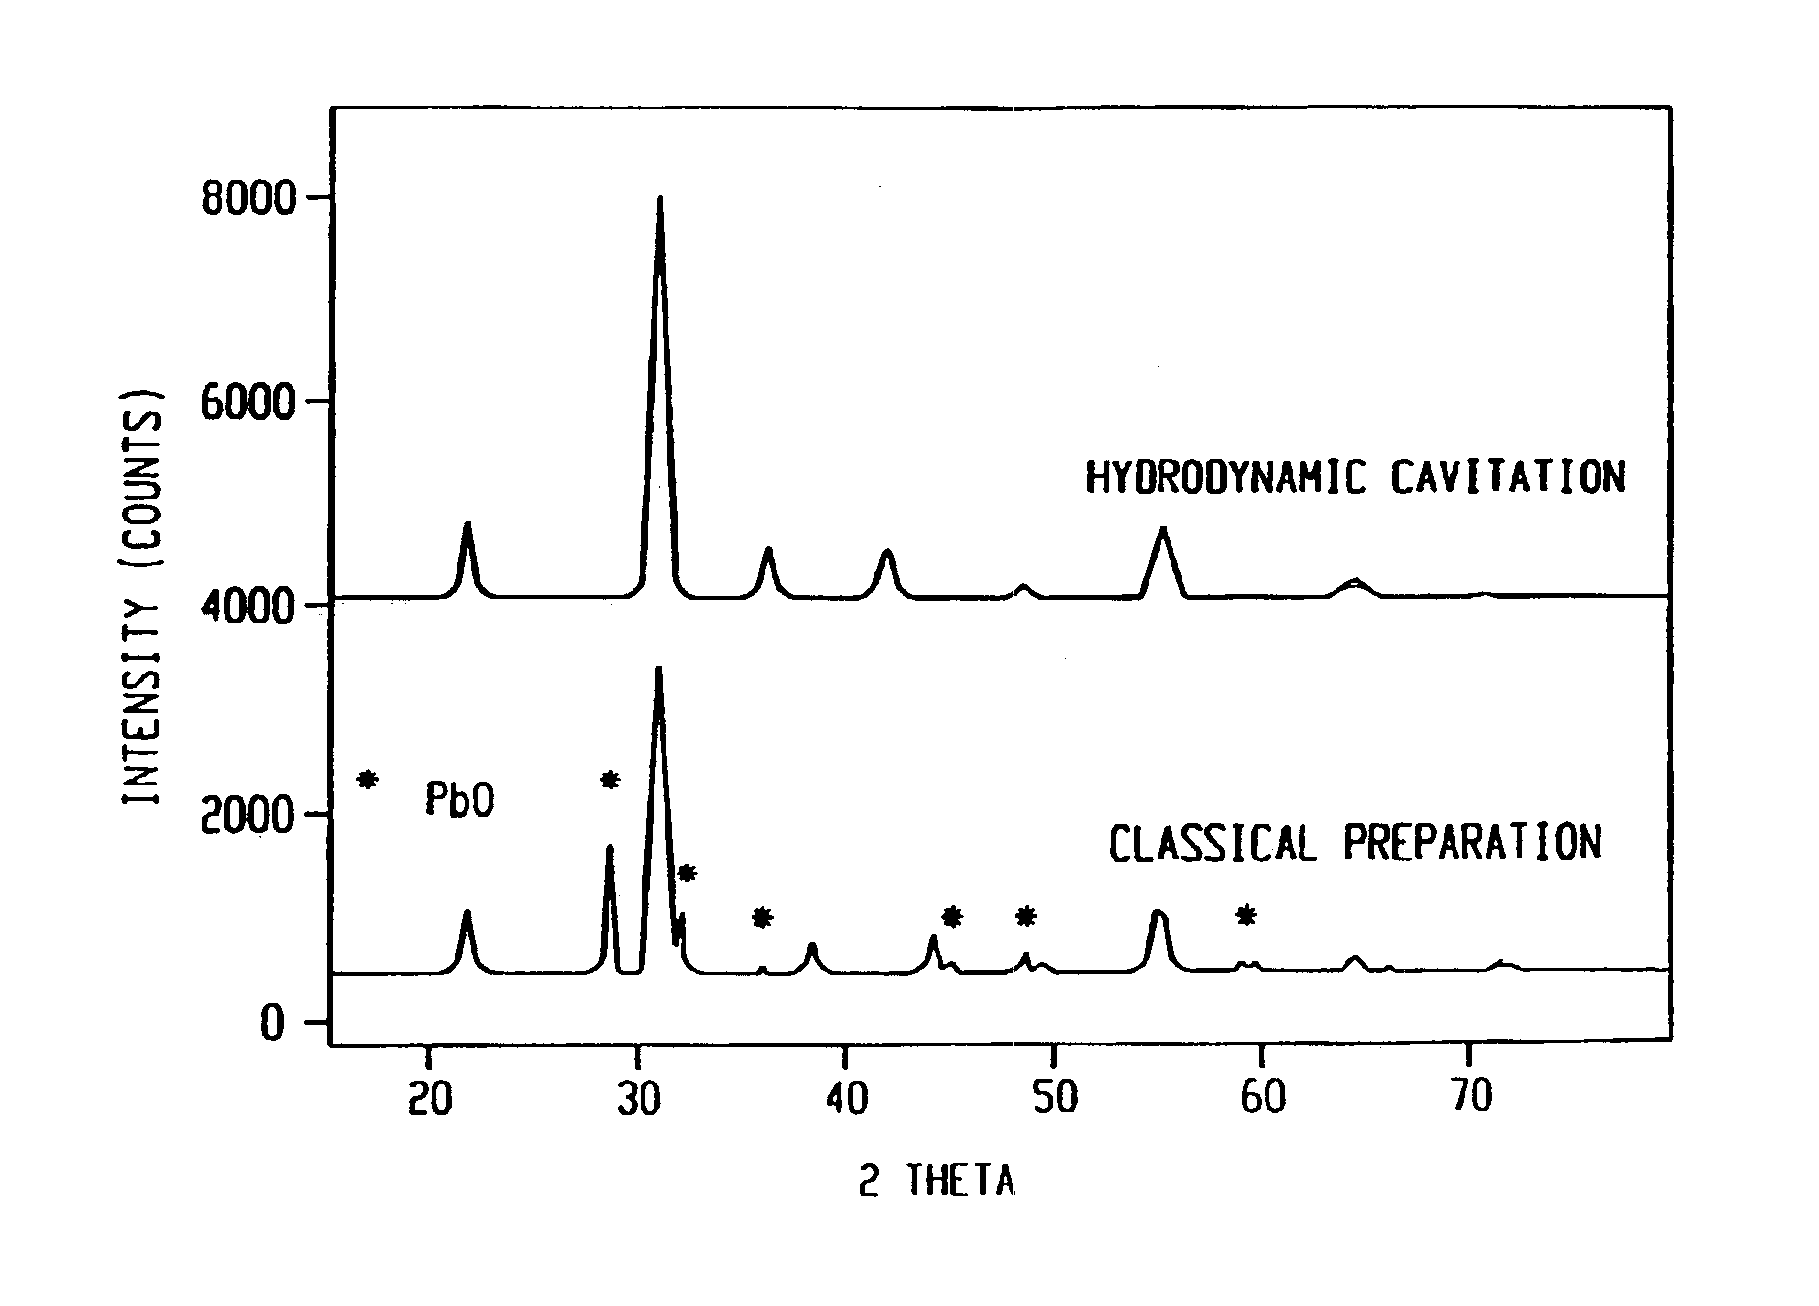 Method of preparing metal containing compounds using hydrodynamic cavitation